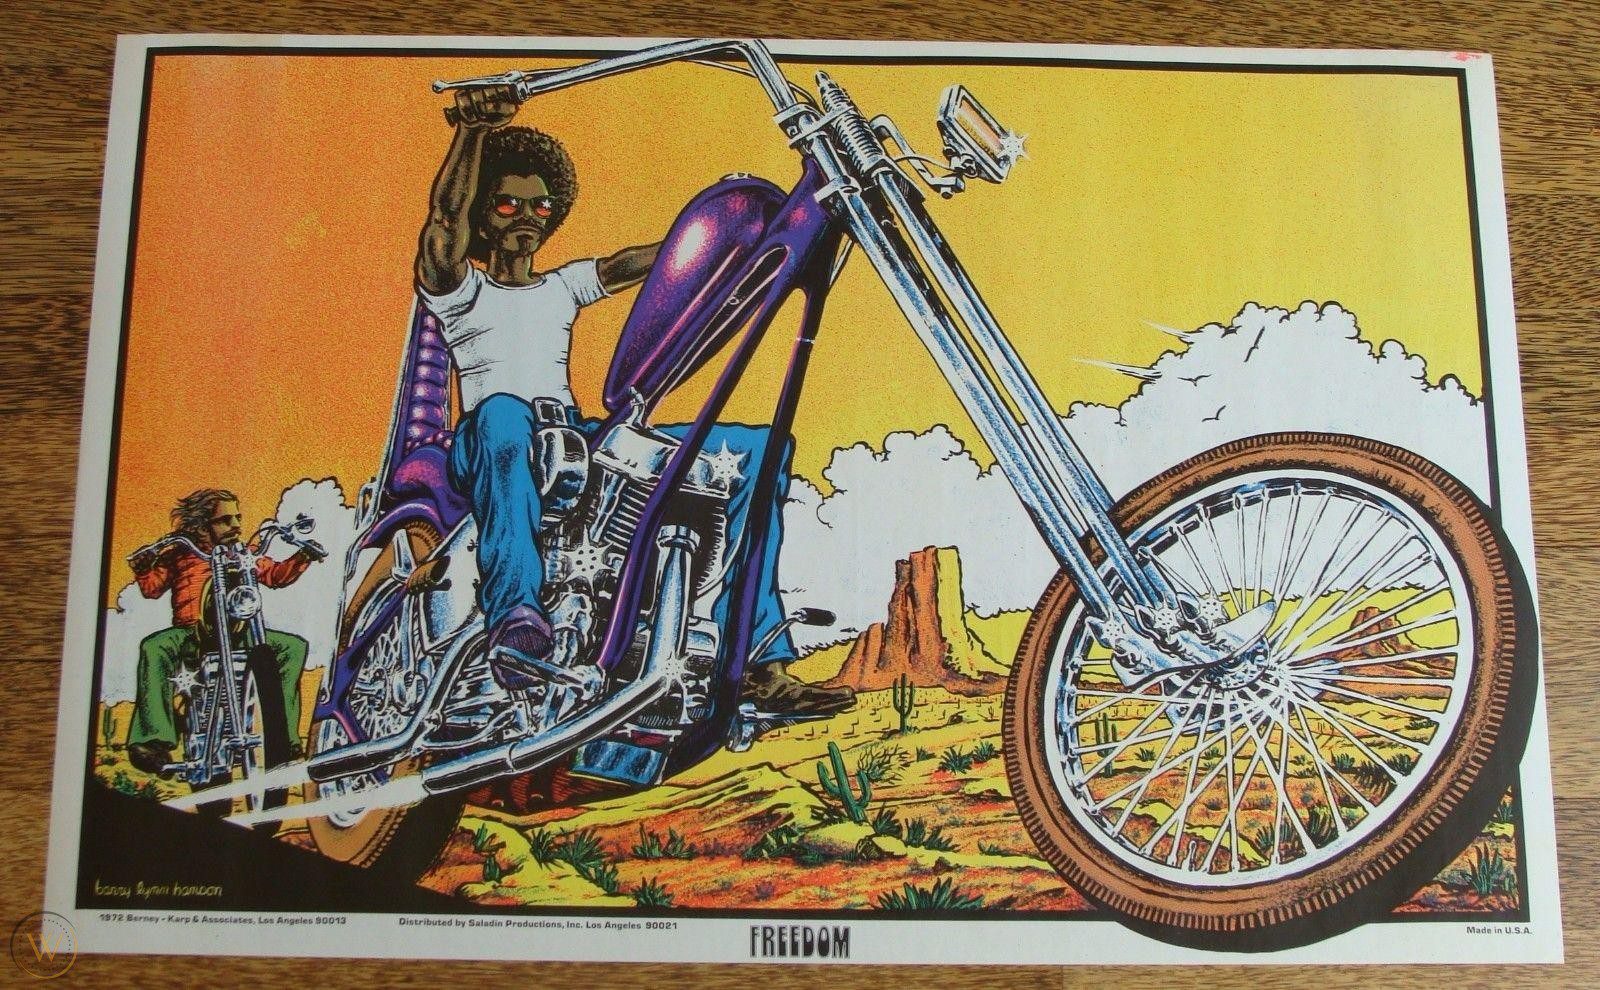 A hippie poster showing a man riding a harley from the 1960s